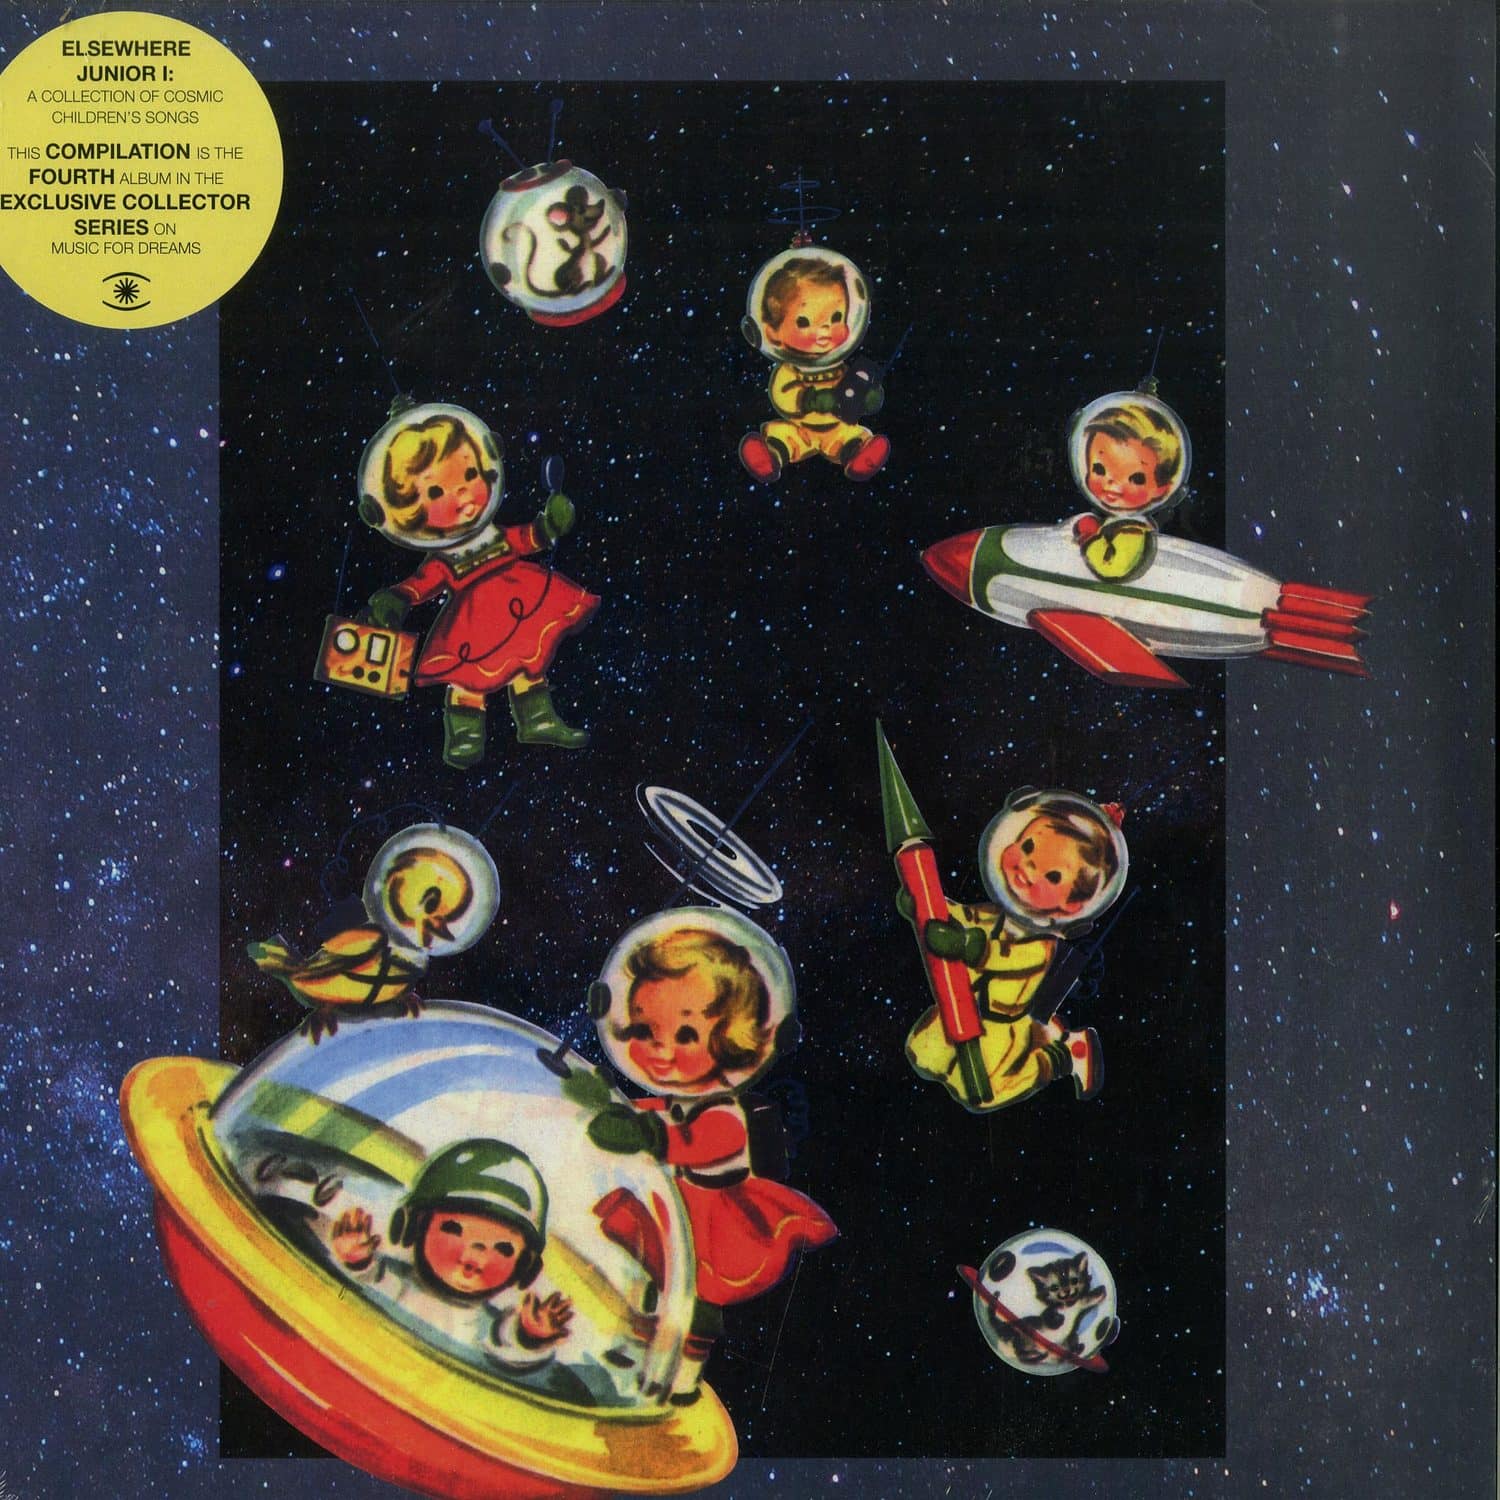 Various Artists - ELSEWHERE JUNIOR I - A COLLECTION OF COSMIC CHILDRENS SONGS 